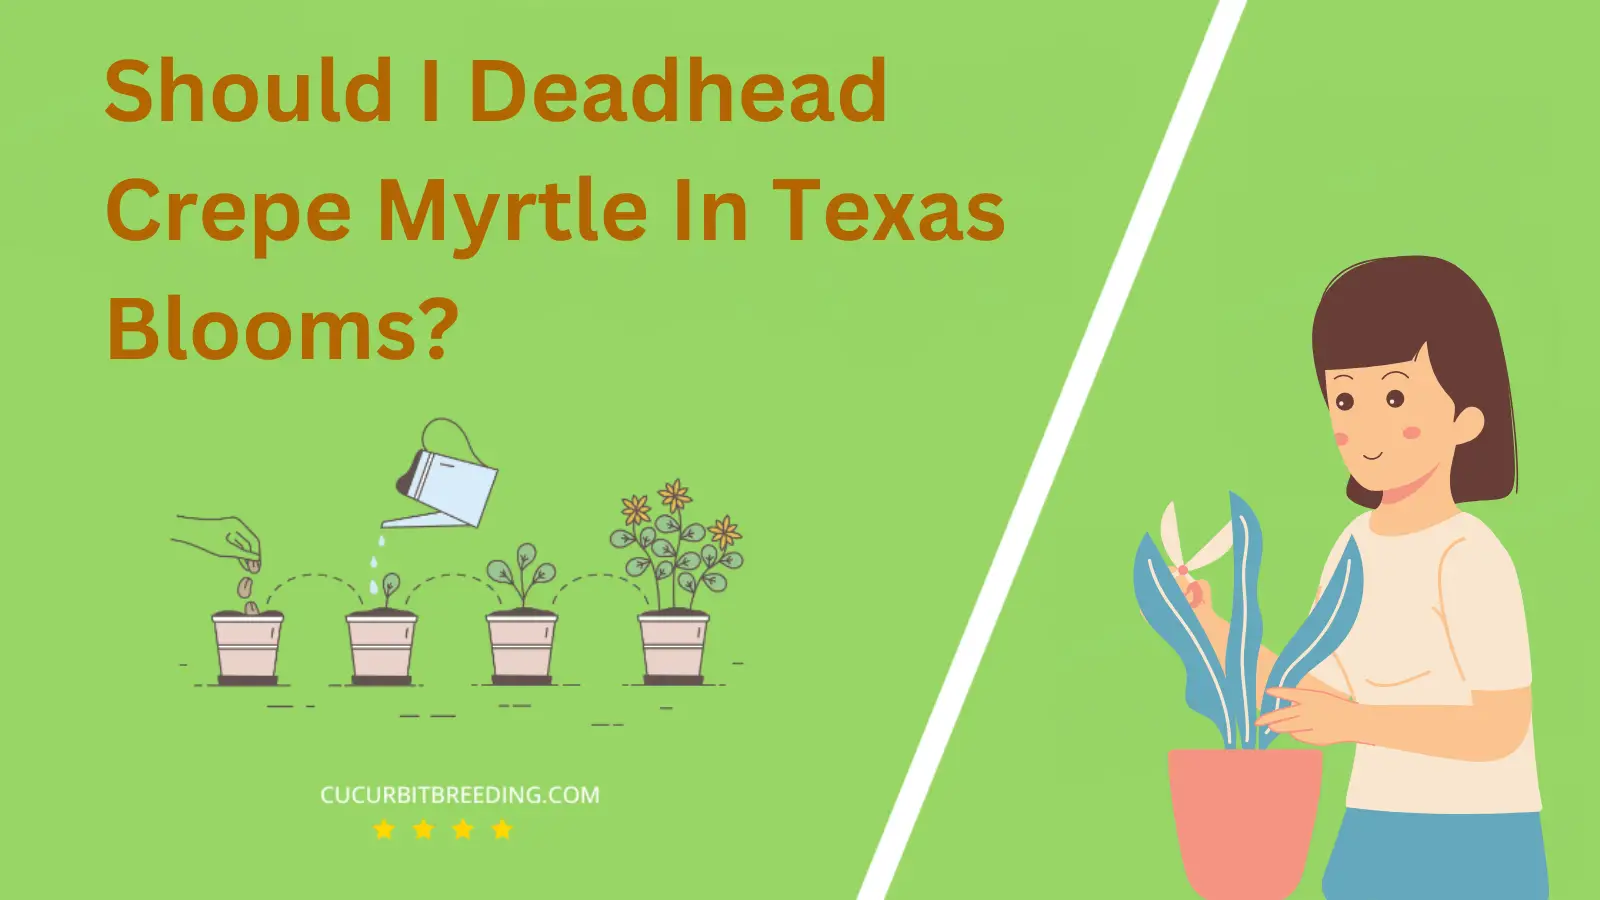 Should I Deadhead Crepe Myrtle In Texas Blooms?